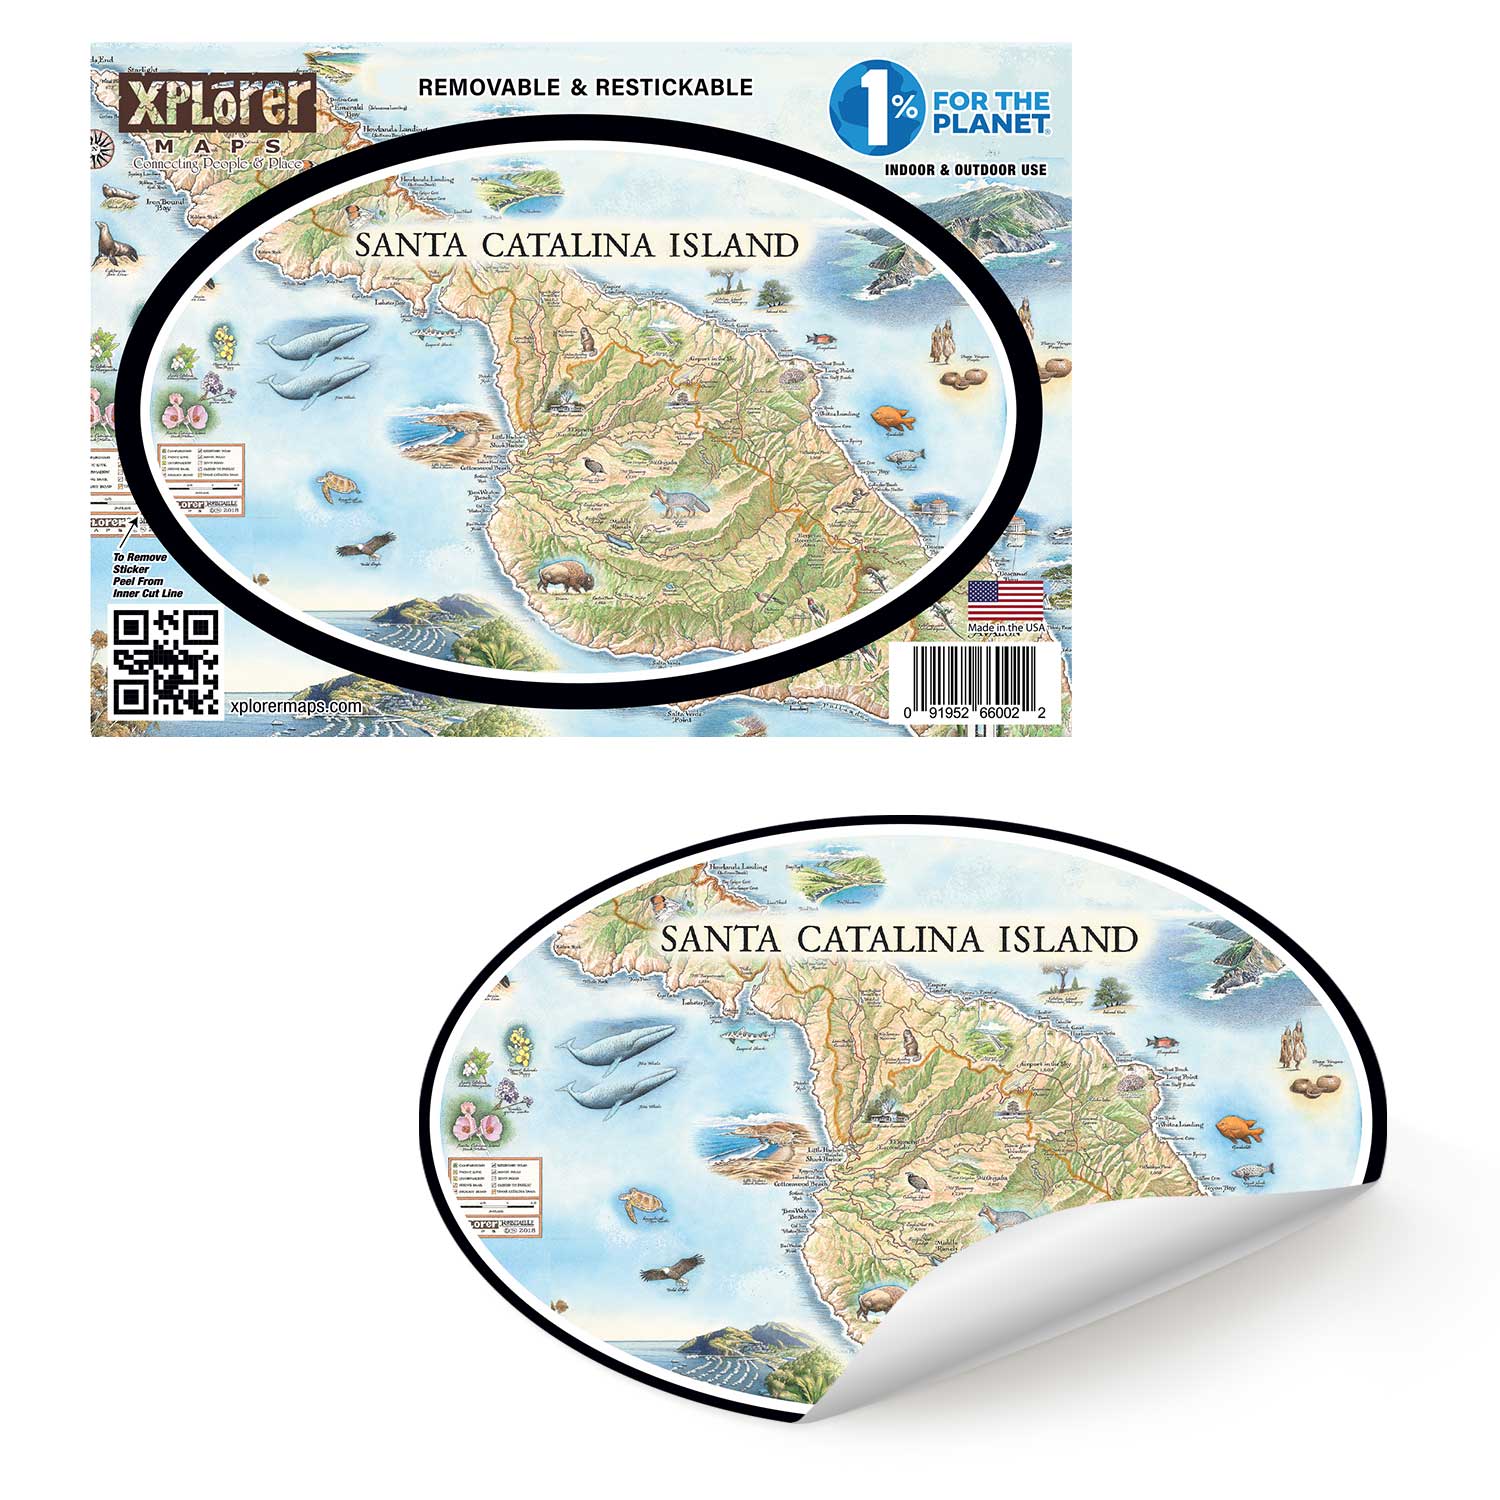 Santa Catalina Island Map Sticker by Xplorer Map. The map features illustrations of places such as Wrigley Memorial, El Rancho Escondido, and Avalon Bay. Flora and fauna include Bison, Catalina Island Fox, Catalina Orange Lip butterfly, Channel Islands tree poppy, and Island oak. 